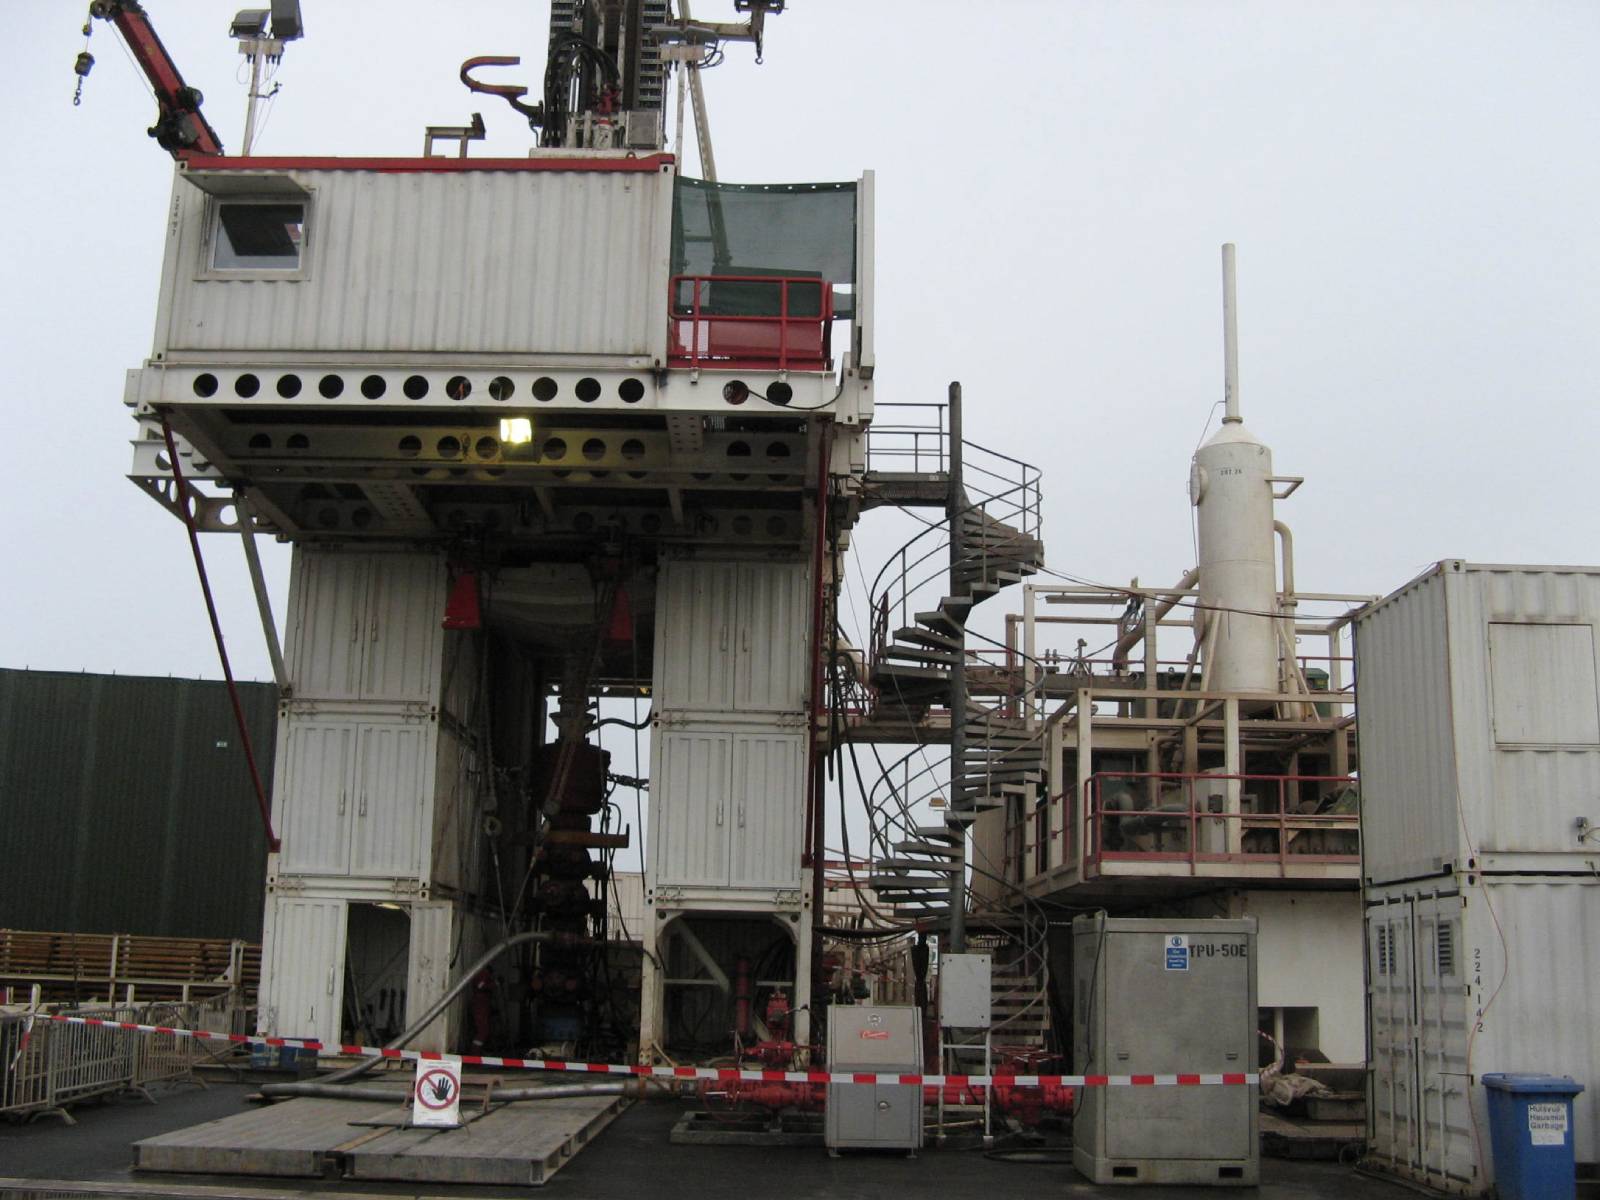 Workover on oil well